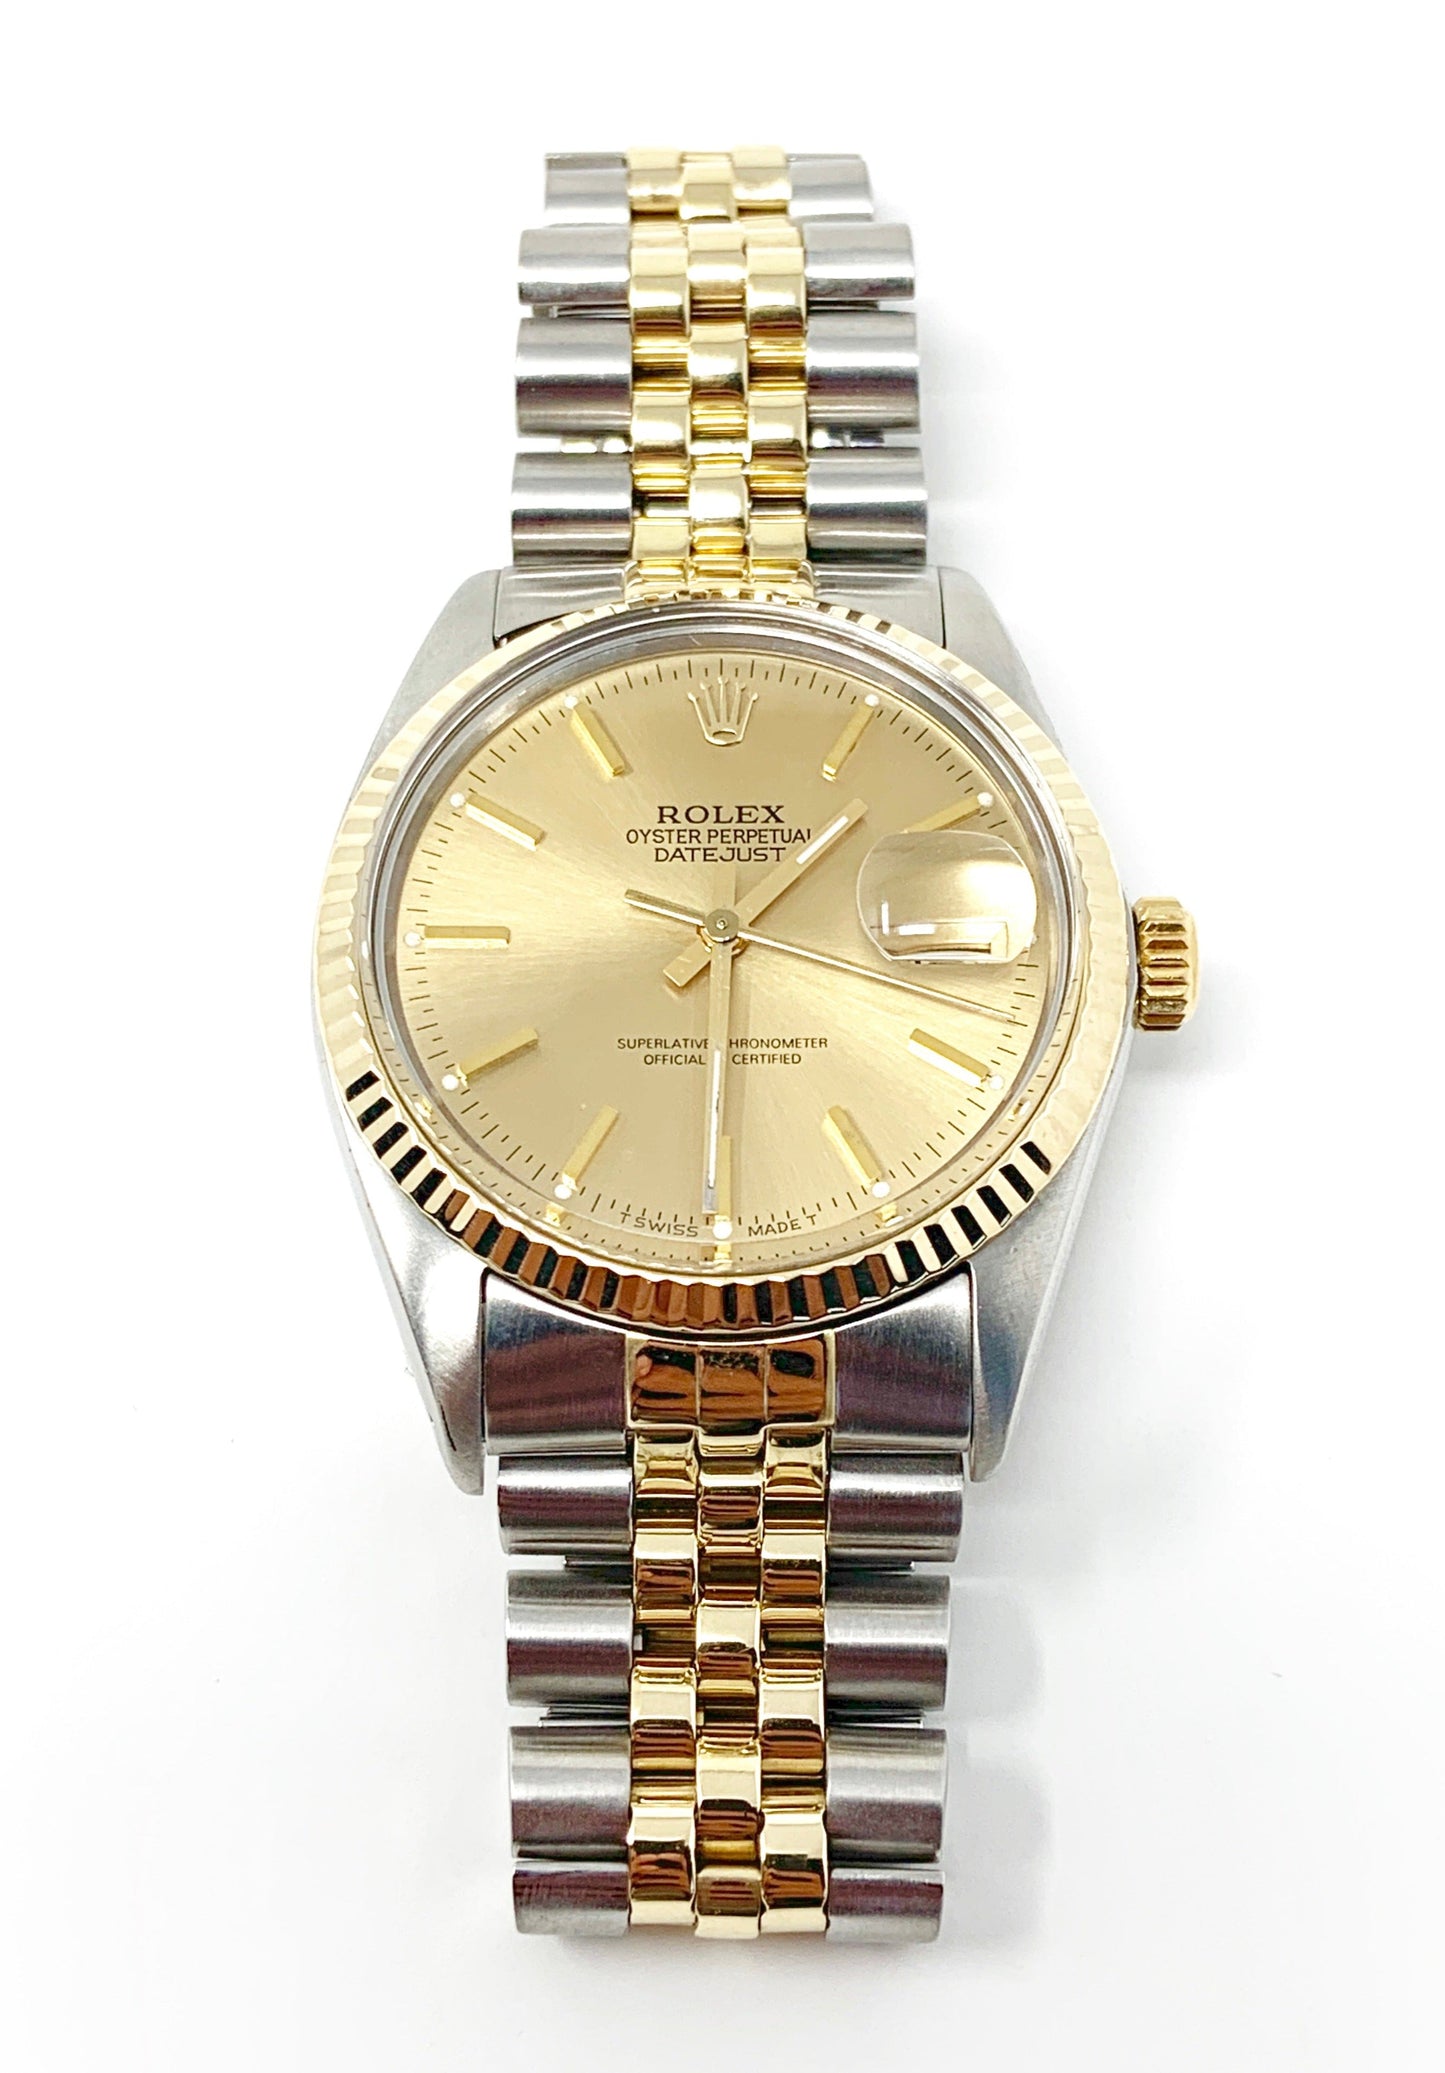 Rolex mens datejust 16013 (T.T) champagne stick dial & yellow gold fluted bezel - Luxury Diaz